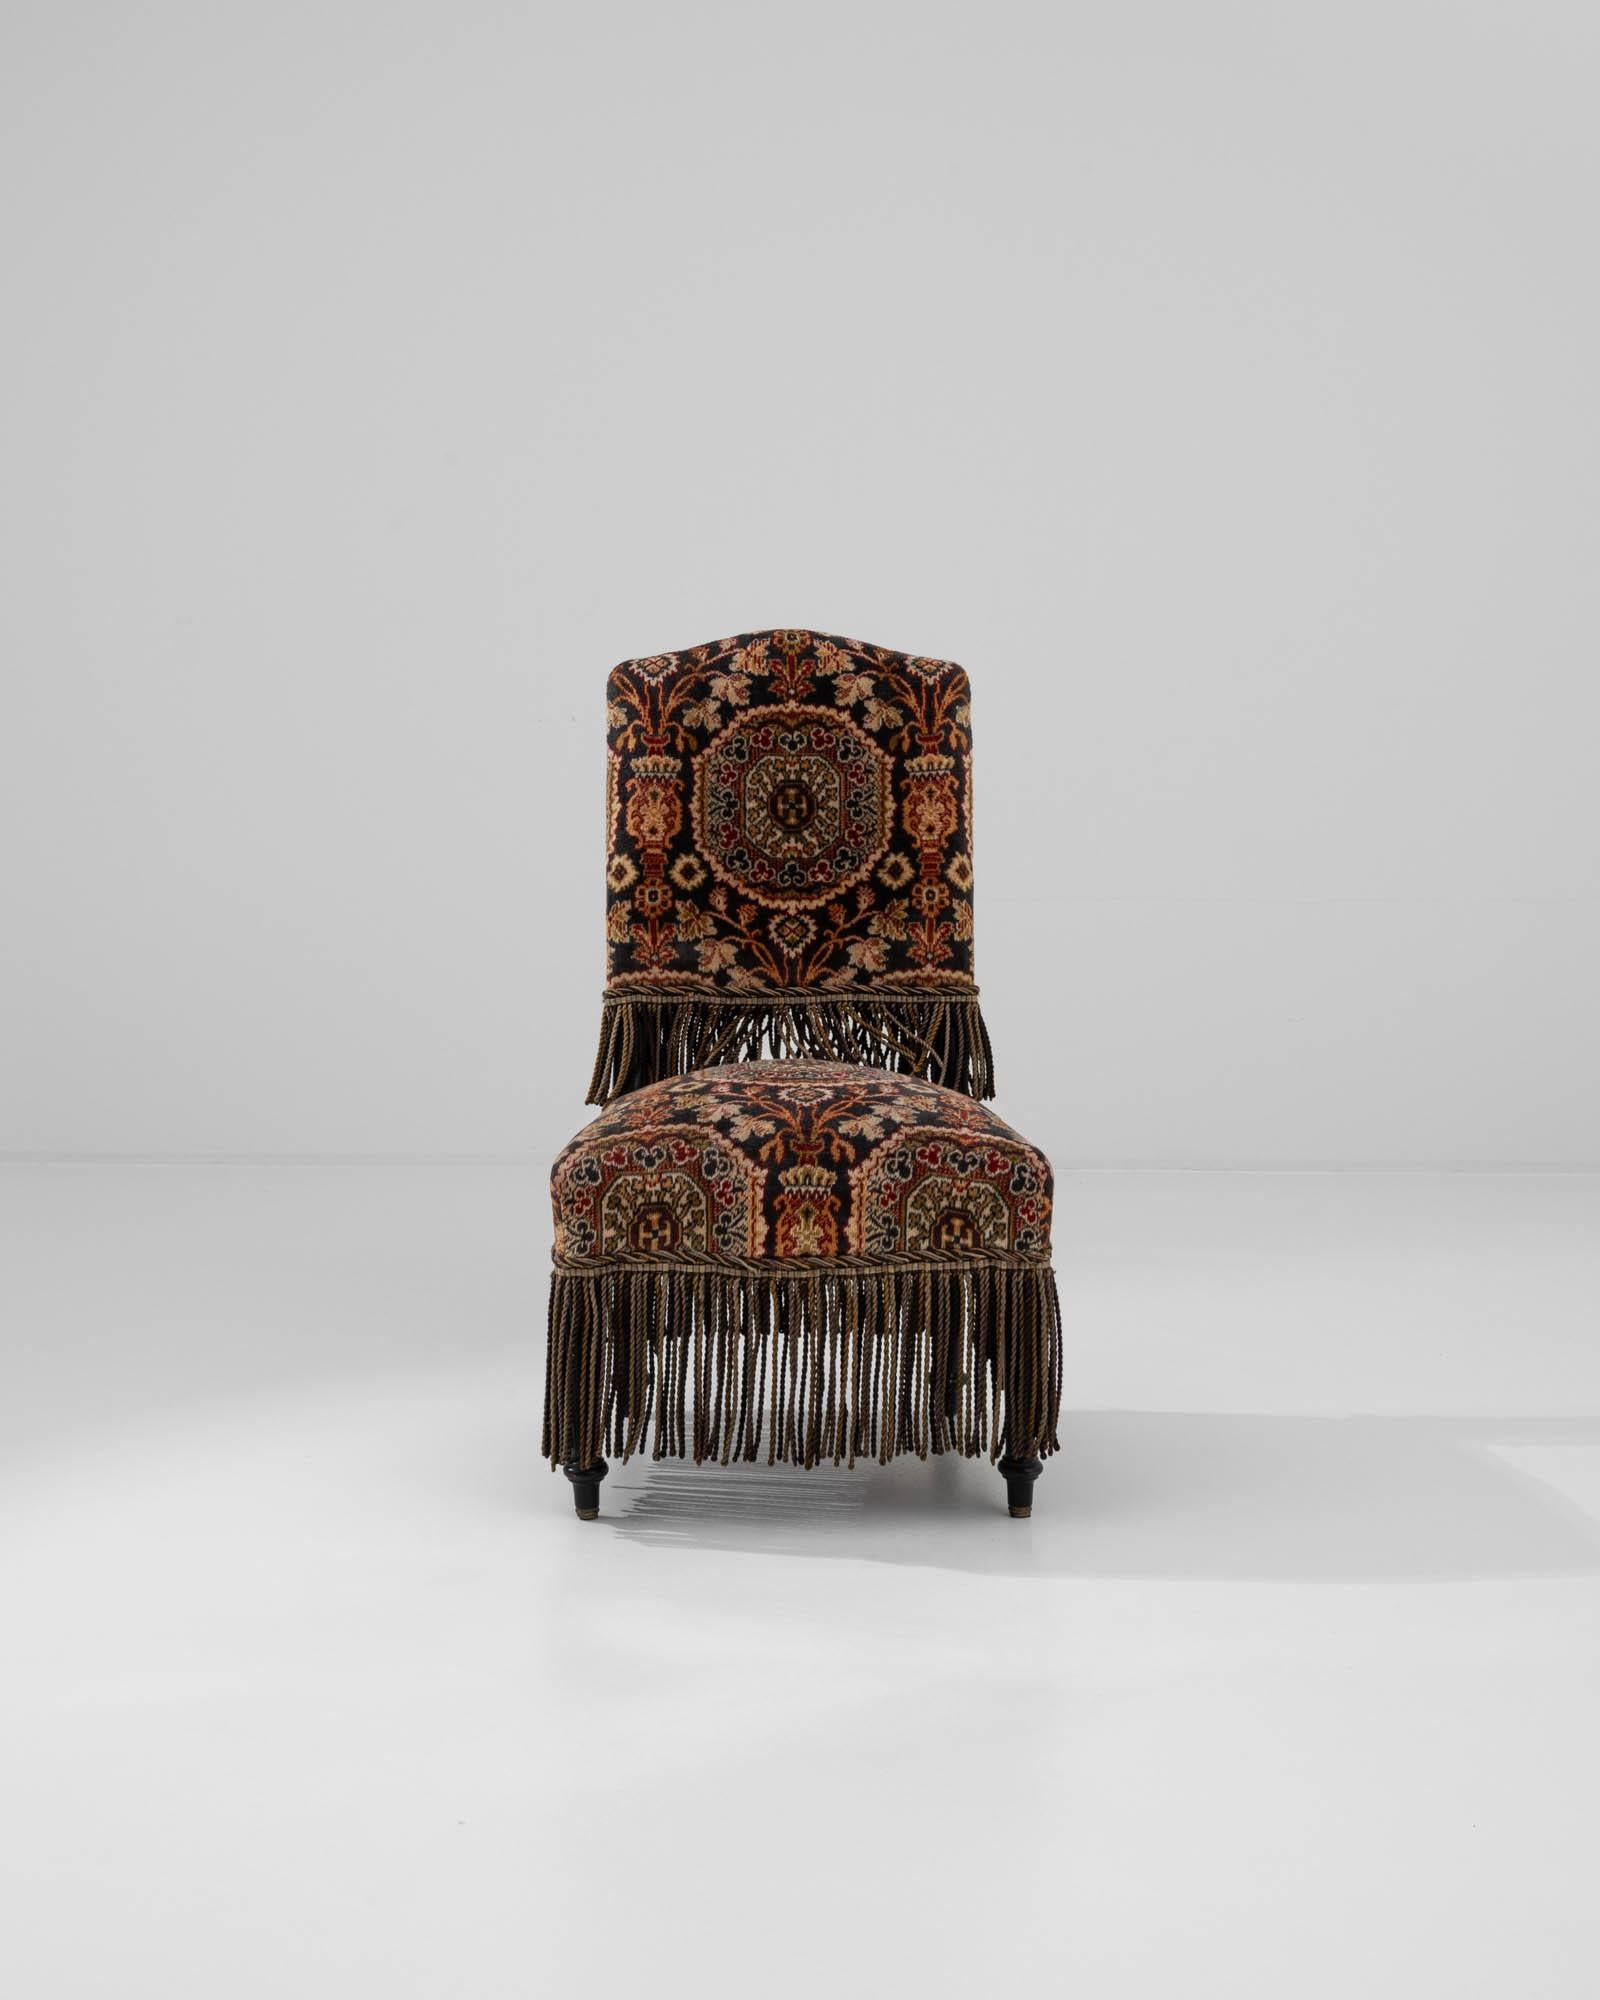 A wooden upholstered armchair created in 19th century France. Lavishly decorated and elegantly shaped, this armchair greets one with a dignified posture. A spectacular arrangement of geometric and floral motifs shine across the upholstered seat and